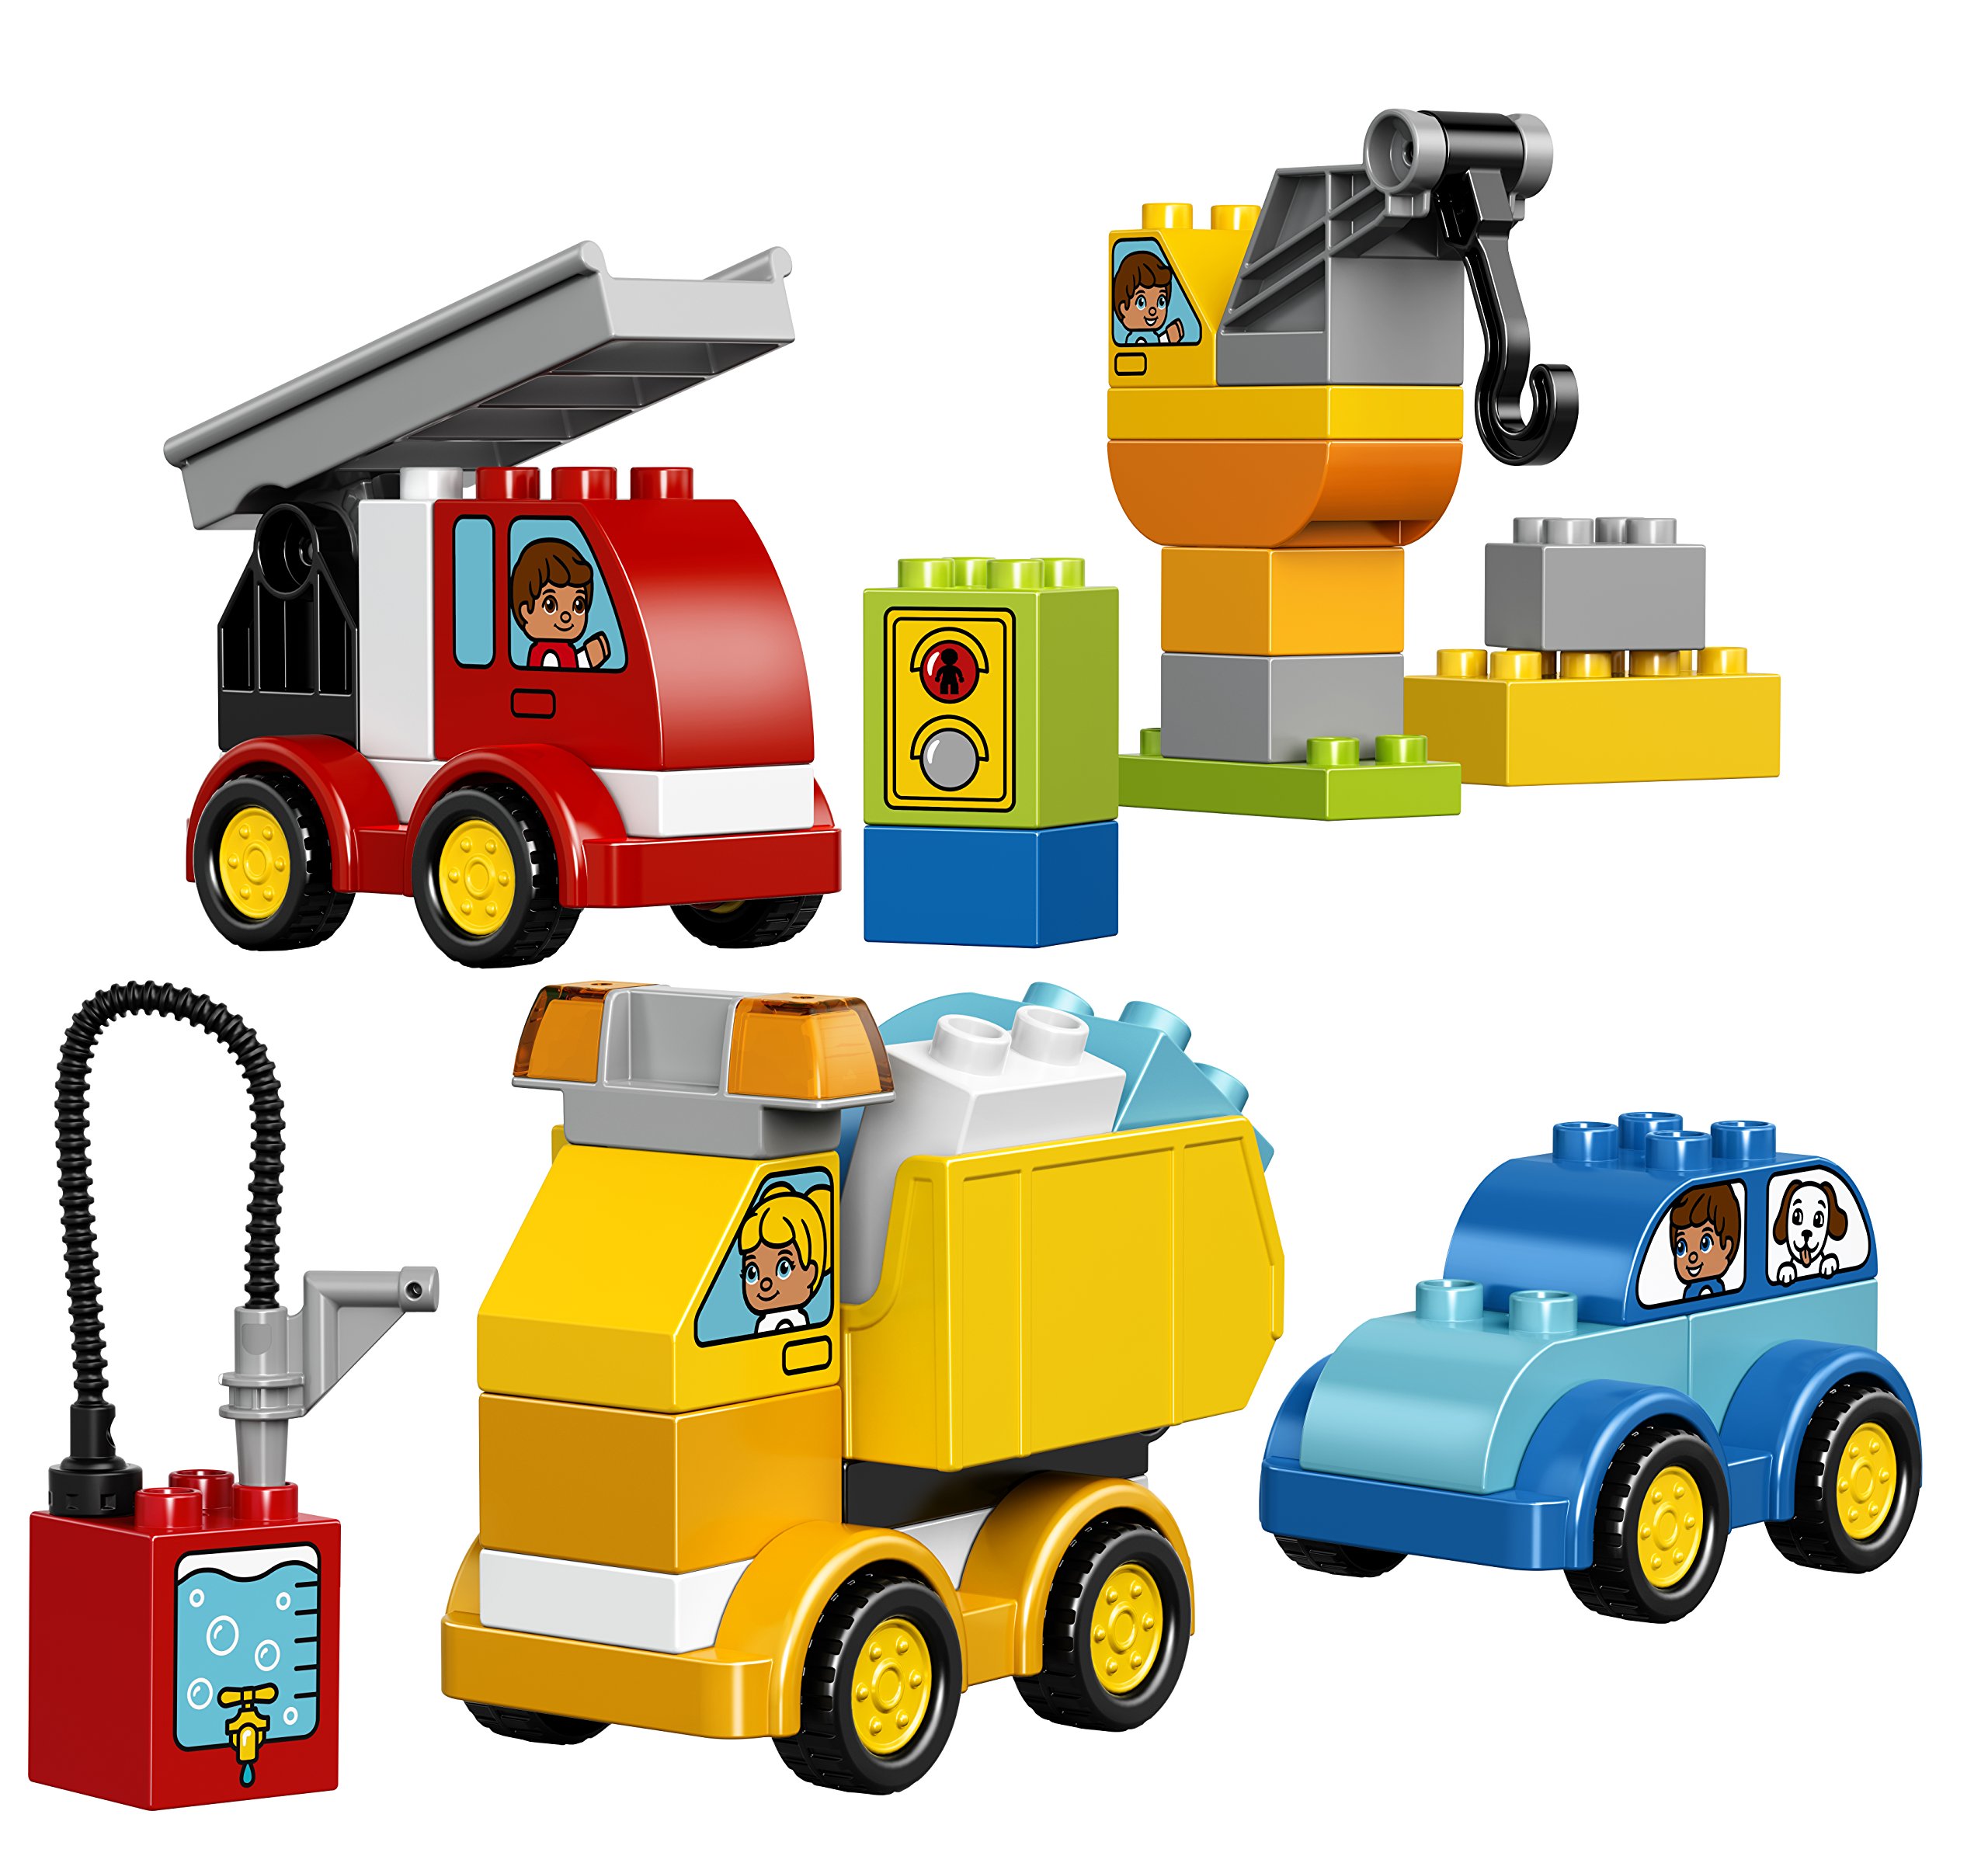 Lego DUPLO My First Cars and Trucks 10816 Toy for 1.5-5 Year-Olds